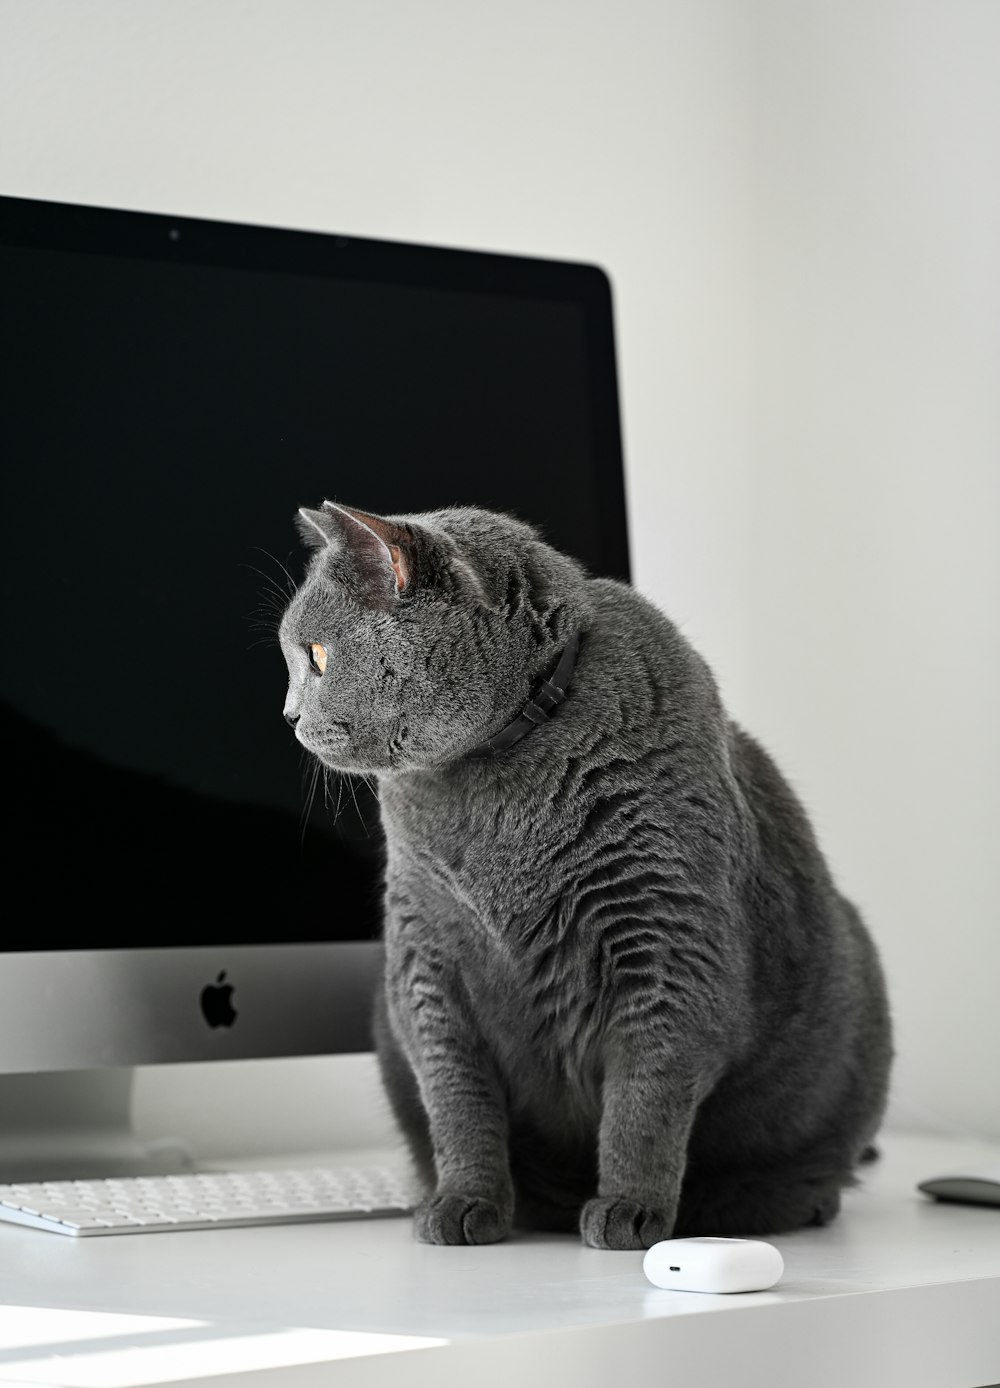 a cat sitting on a desk next to a computer